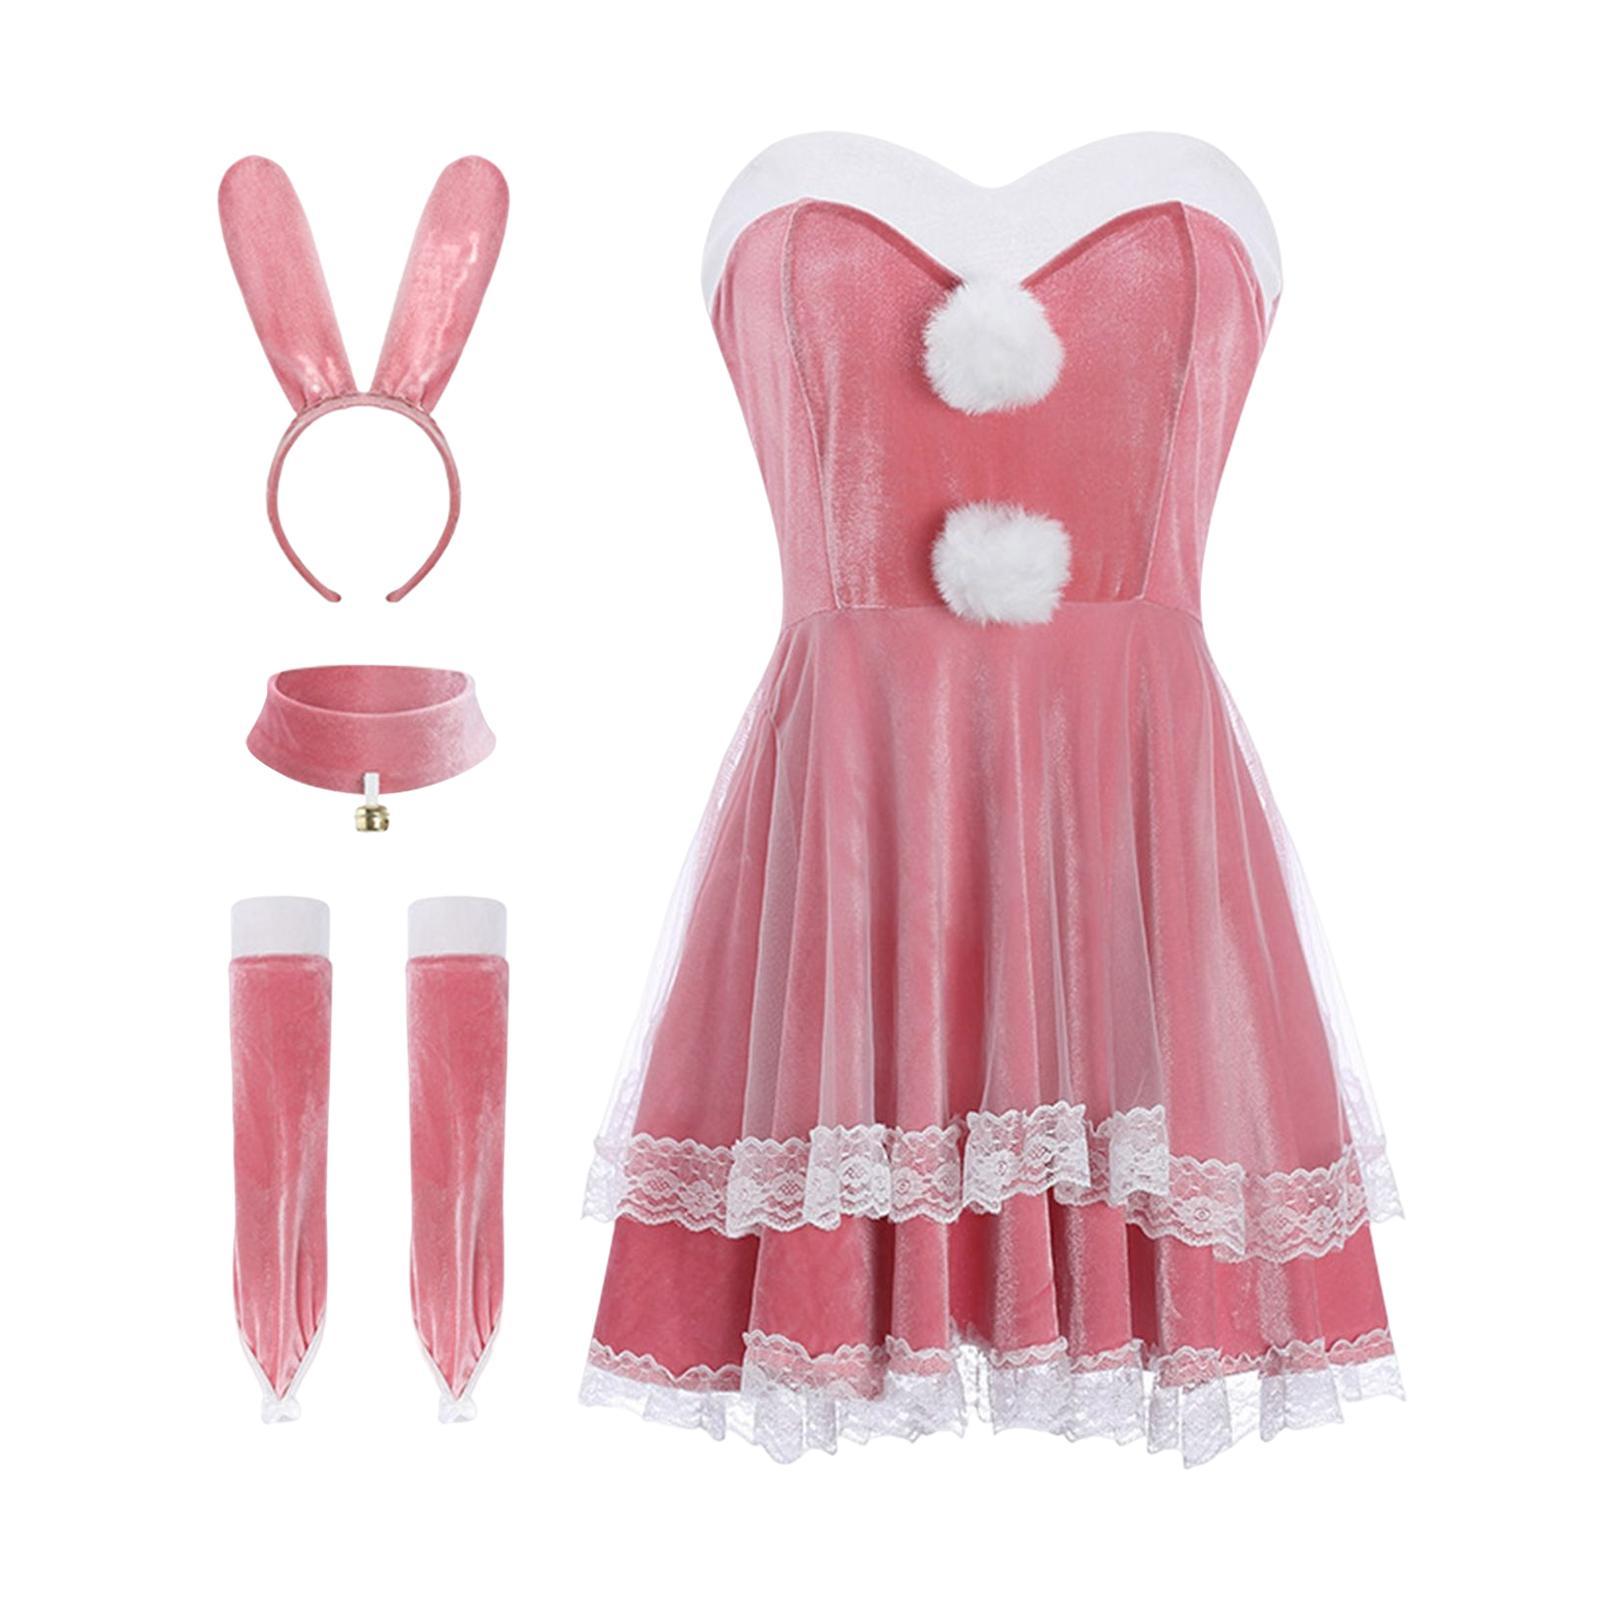 Classic Bunny Costume Cosplay W/ Bunny Ears Christmas Party Dress up